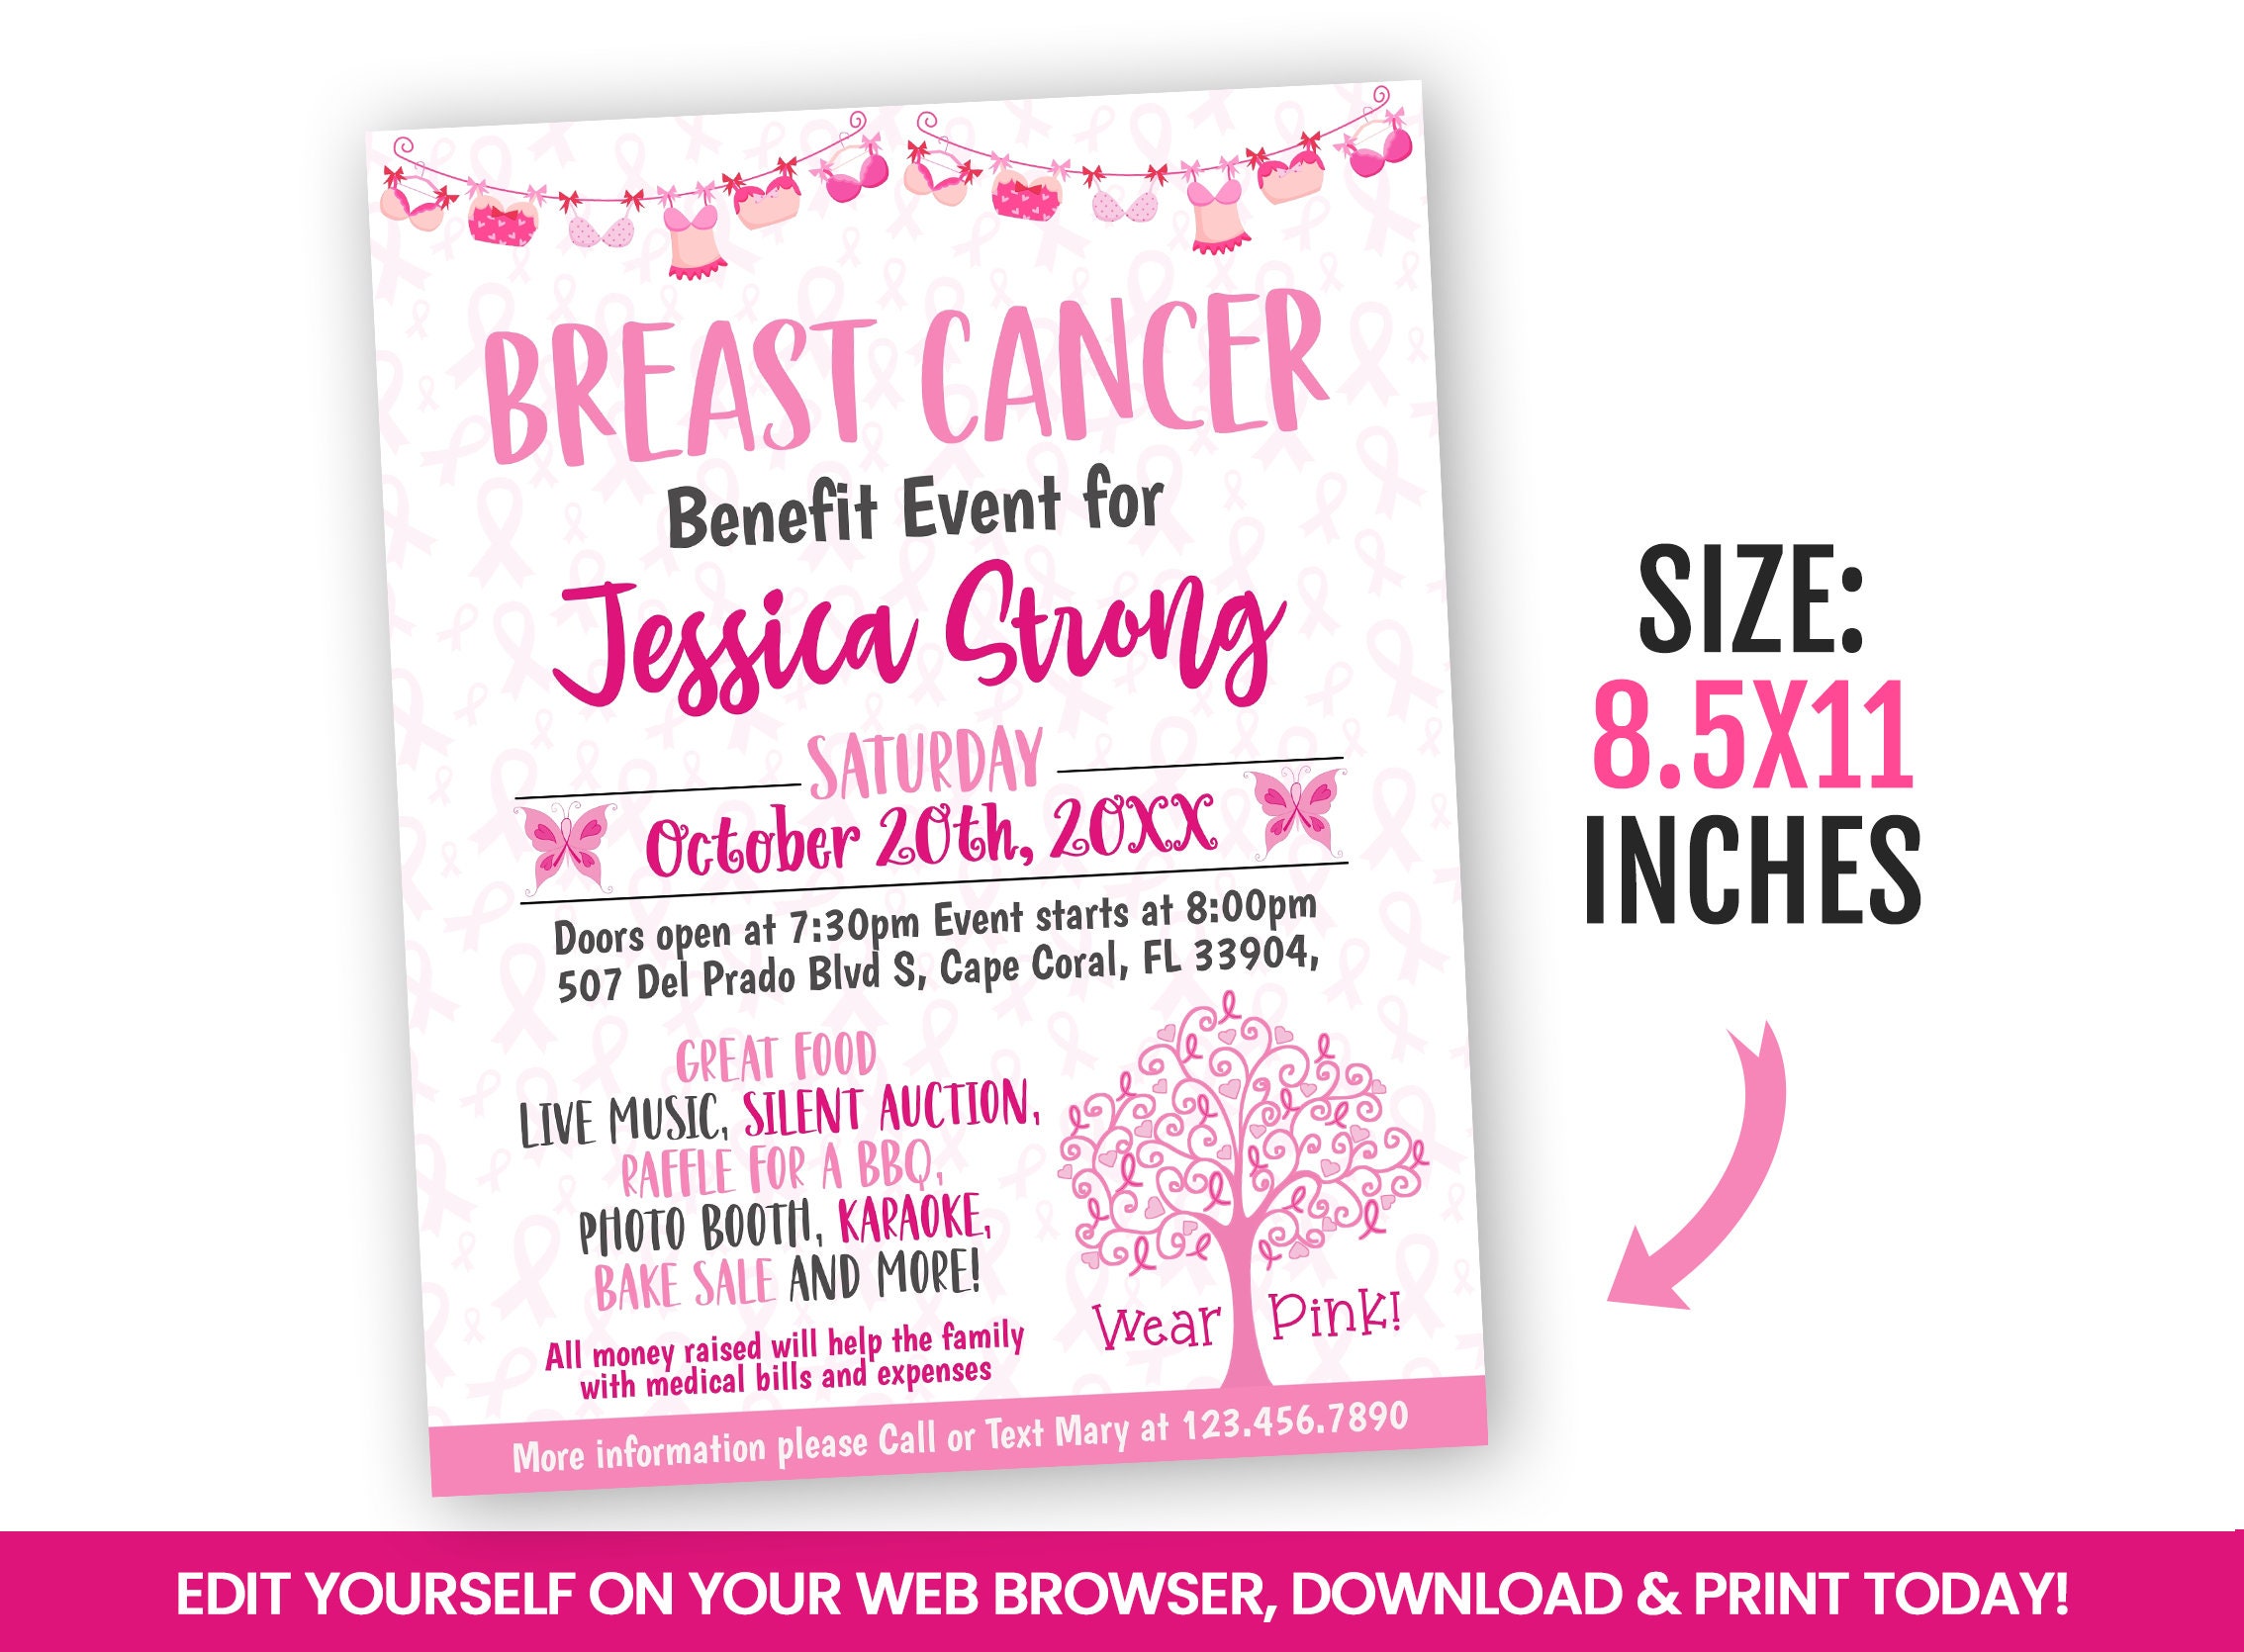 EDITABLE Breast Cancer Fundraiser Event Flyer, Cancer Benefit, Awareness  Month, Self Editing 22.22x22 Inches INSTANT ACCESS With Cancer Fundraiser Flyer Template